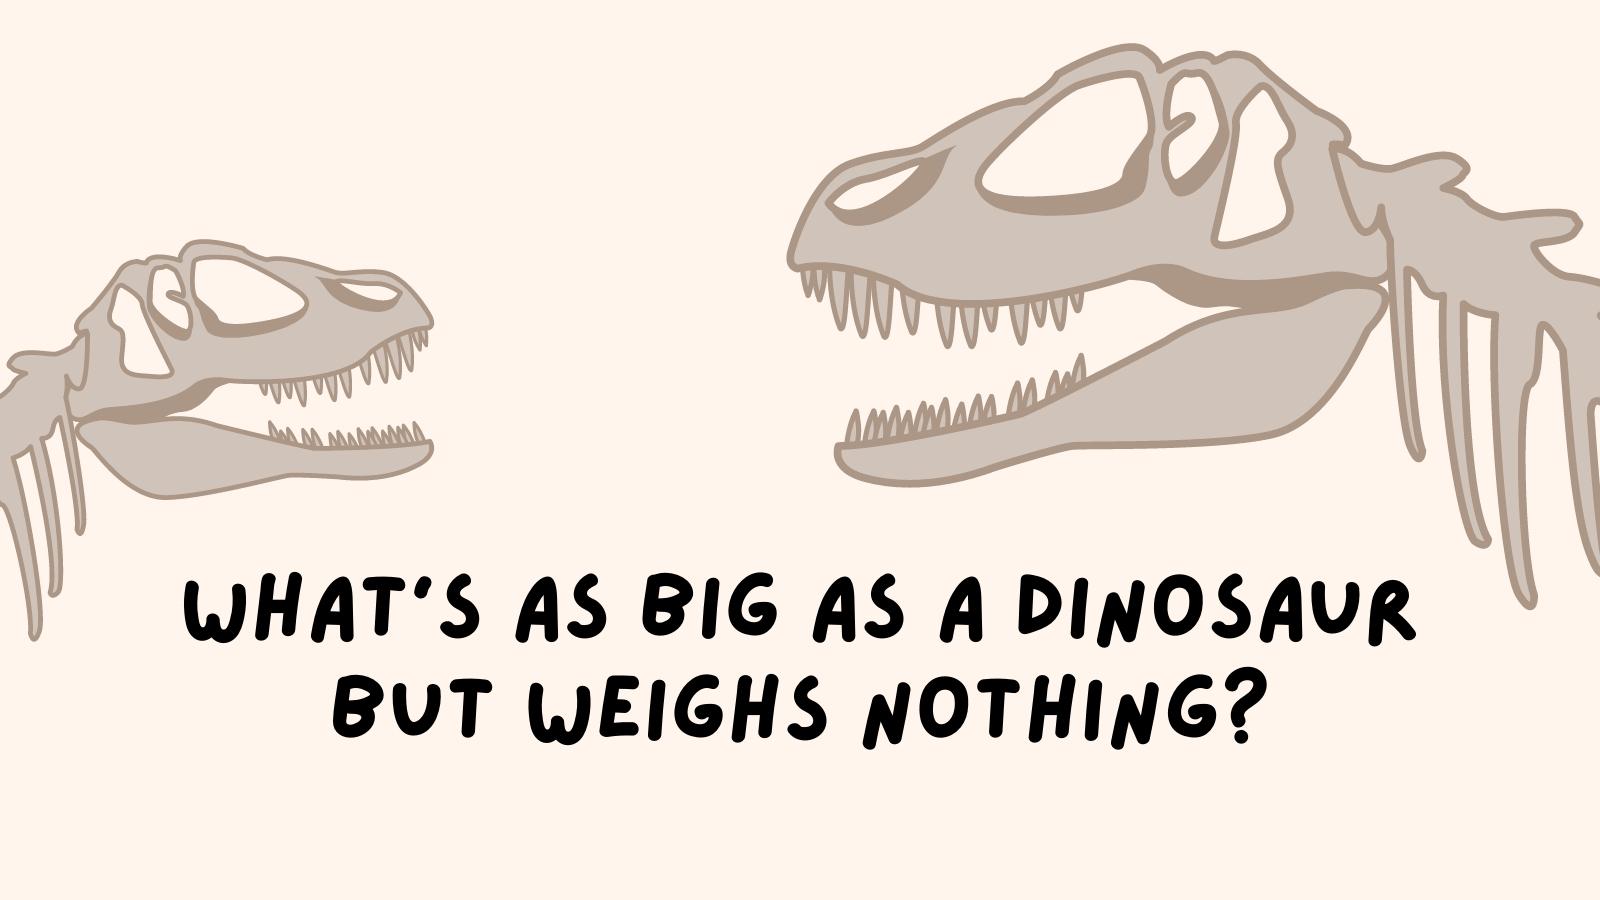 What's as big as a dinosaur but weighs nothing?